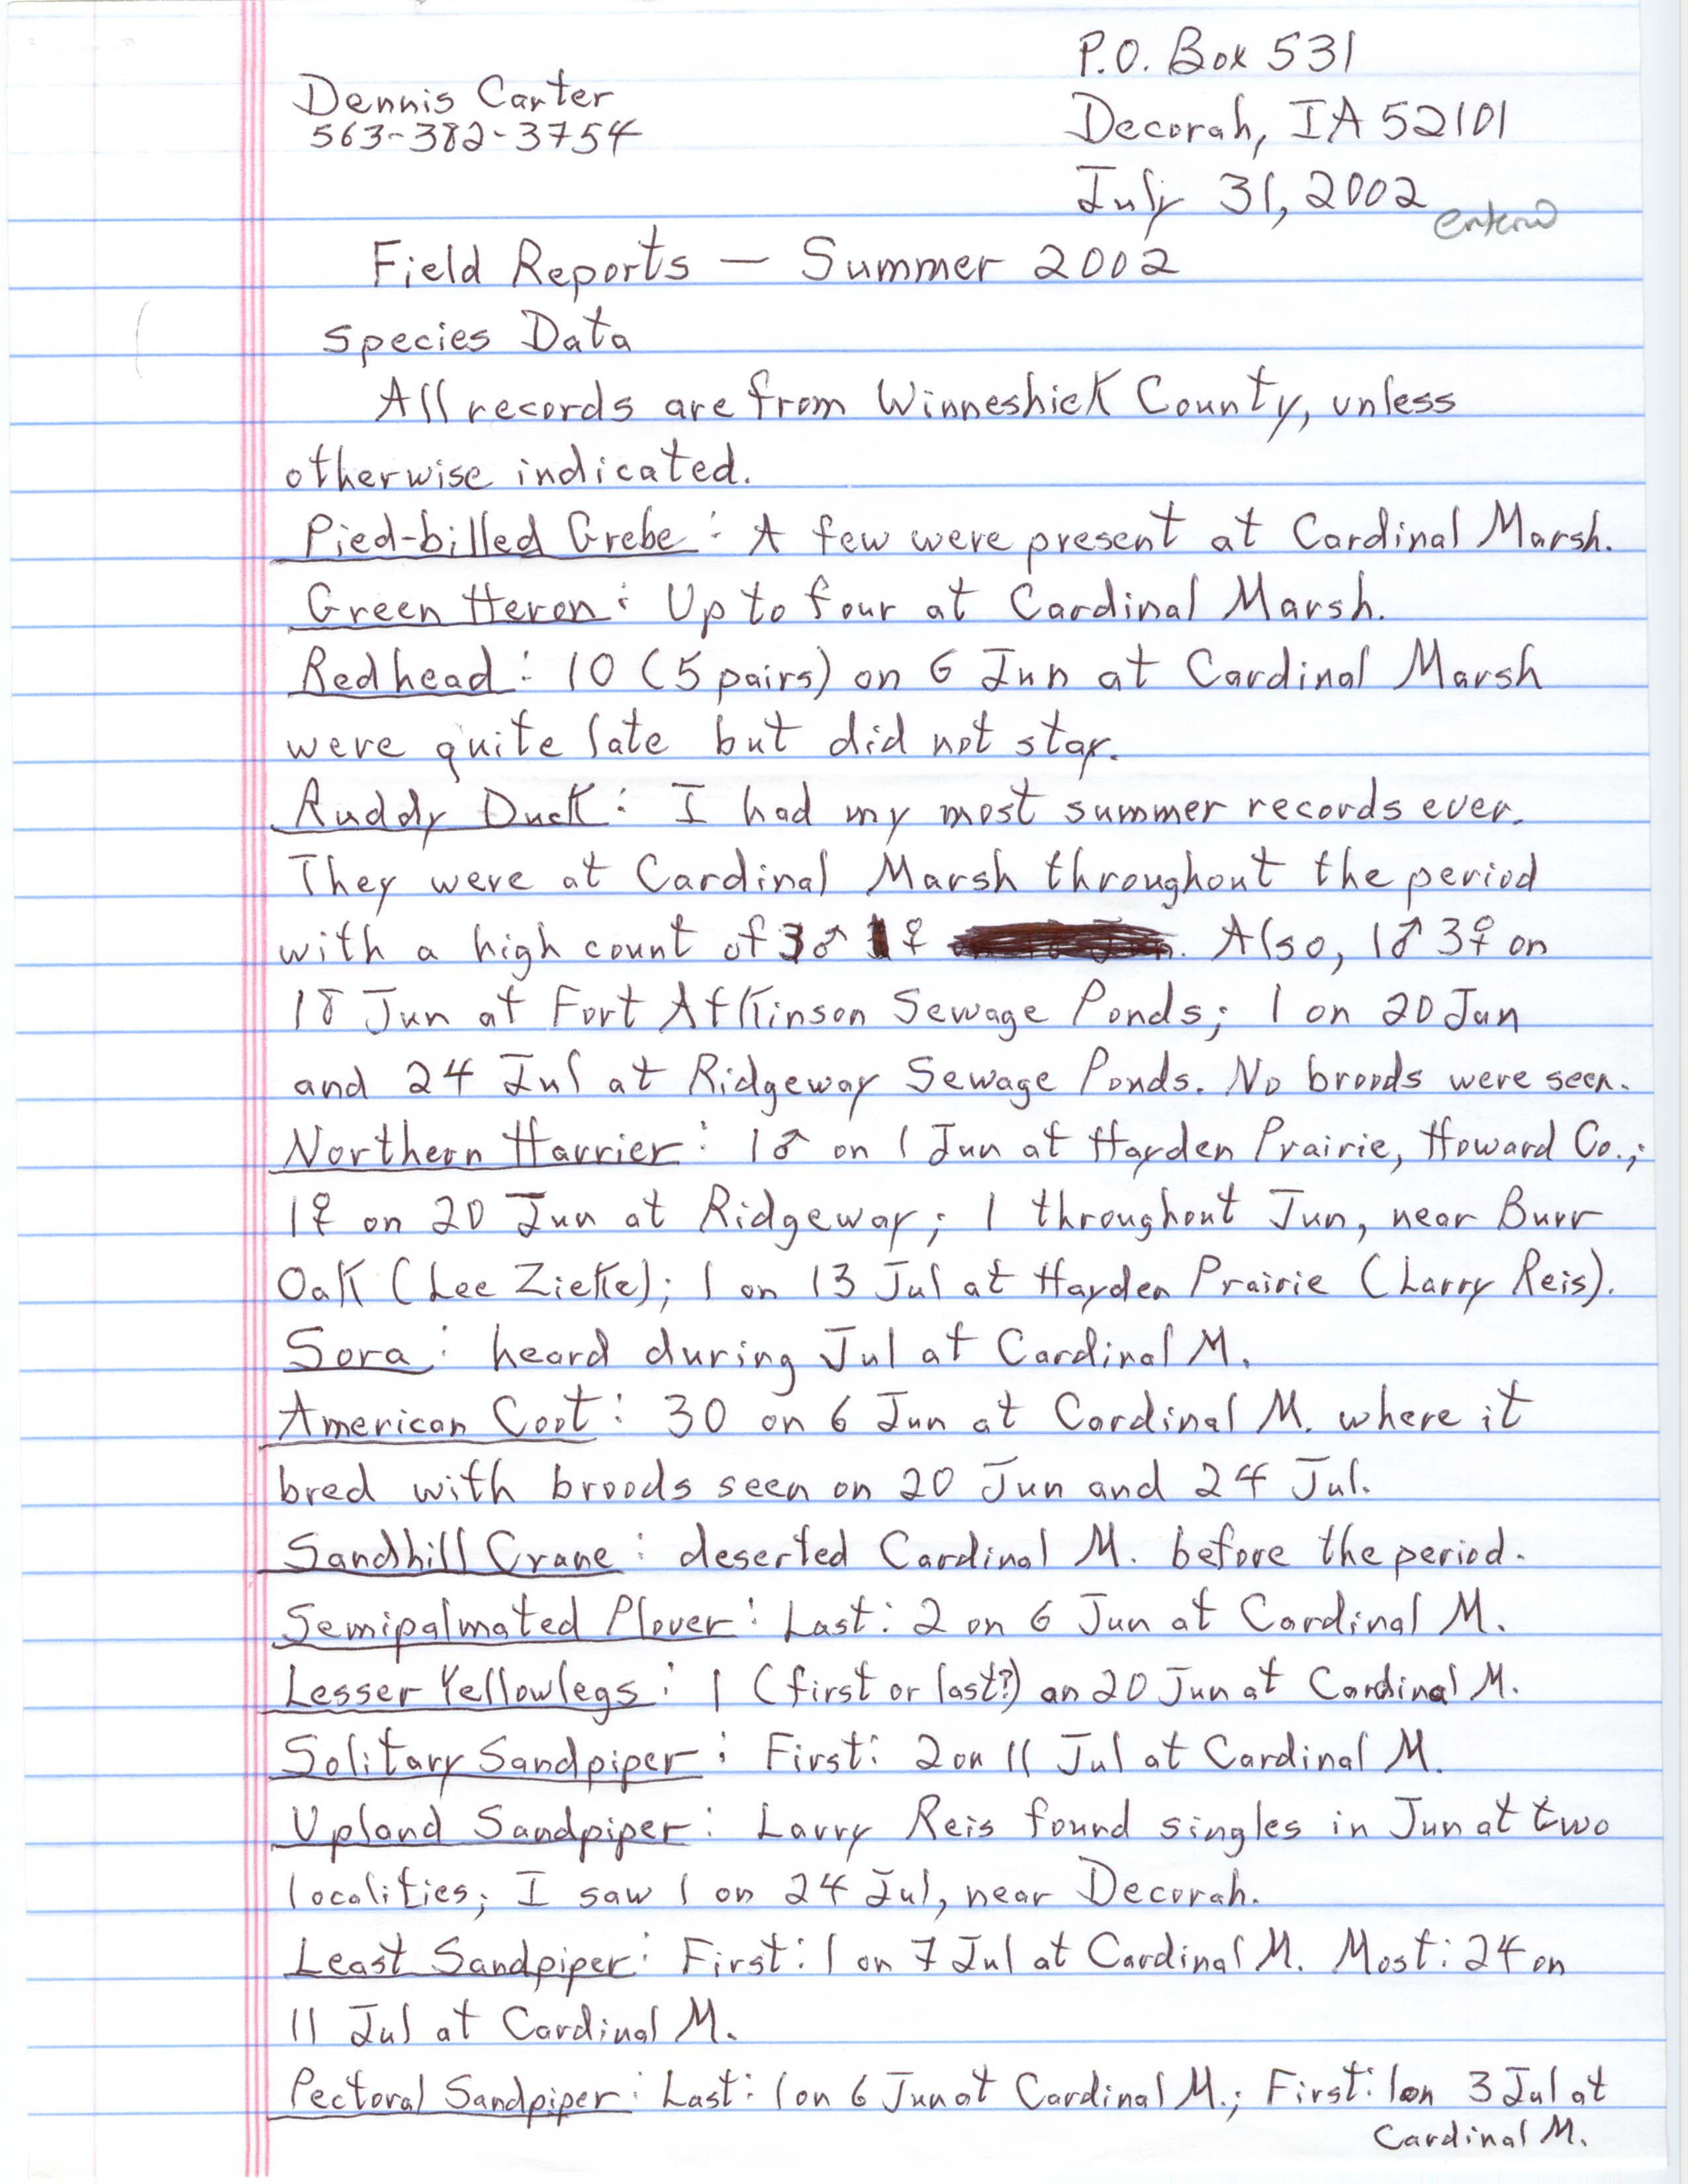 Field notes contributed by Dennis L. Carter, July 31, 2002